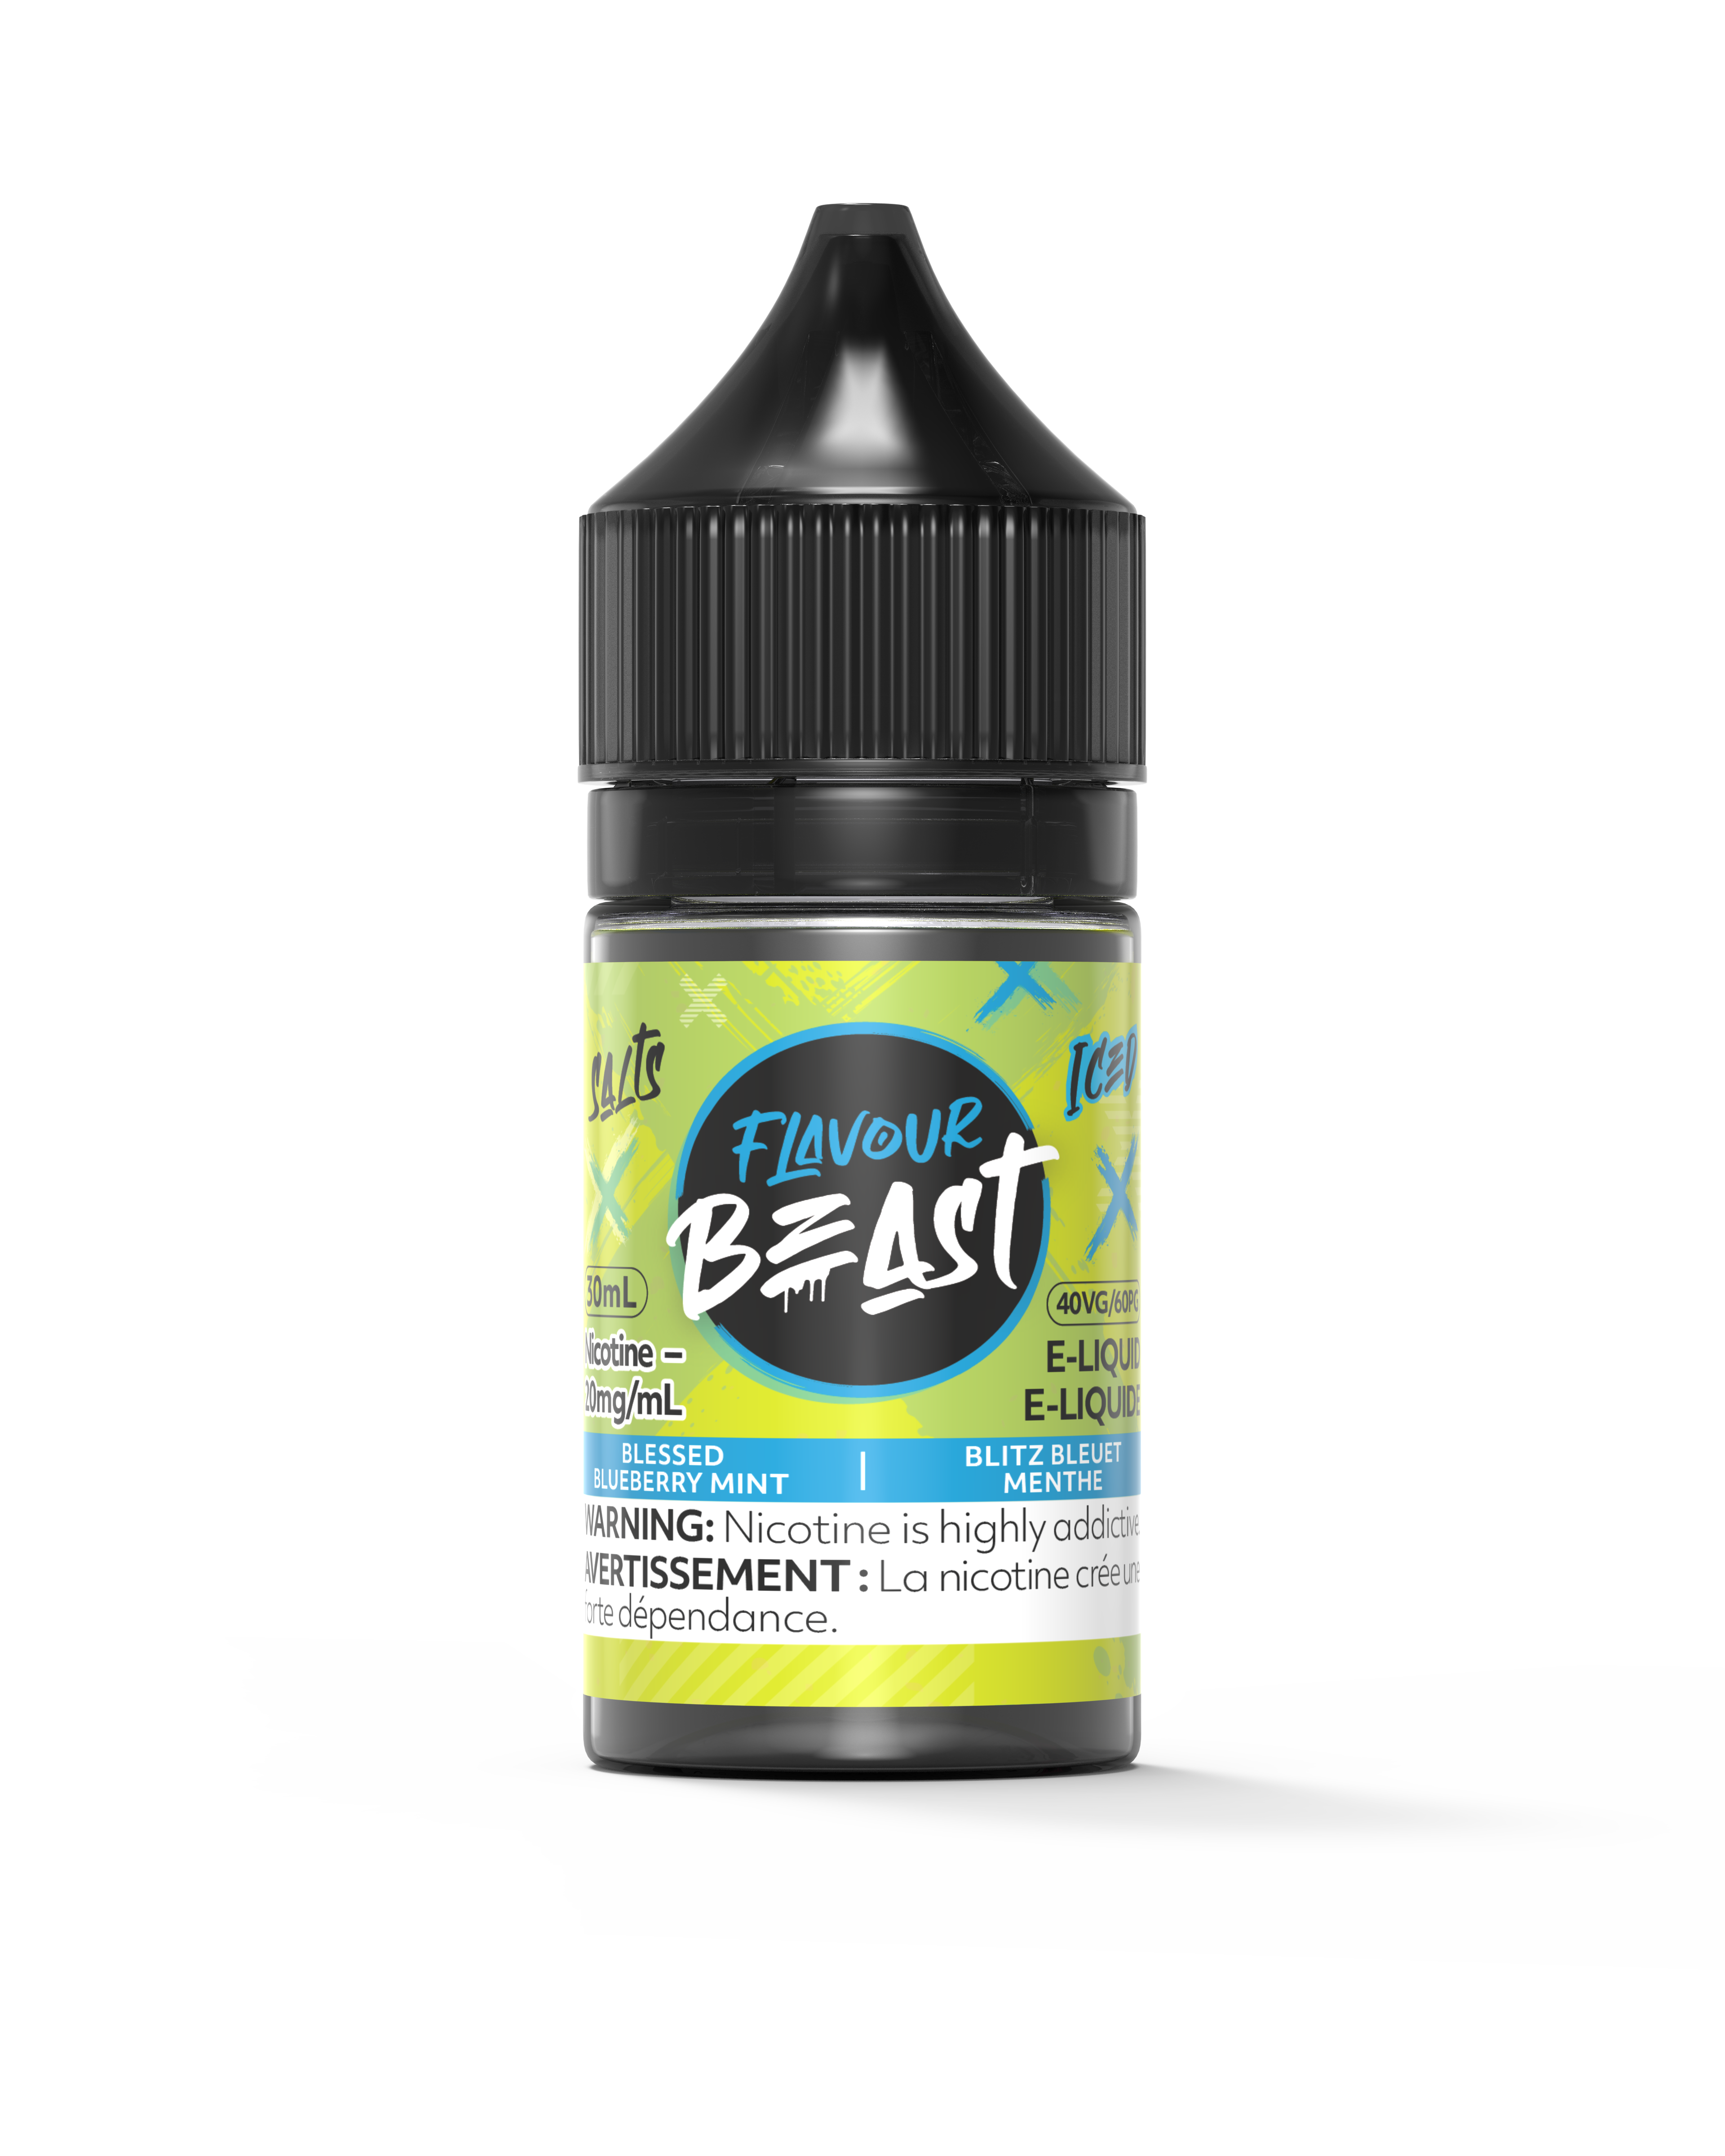 E-Liquid - Blessed Blueberry Mint Iced